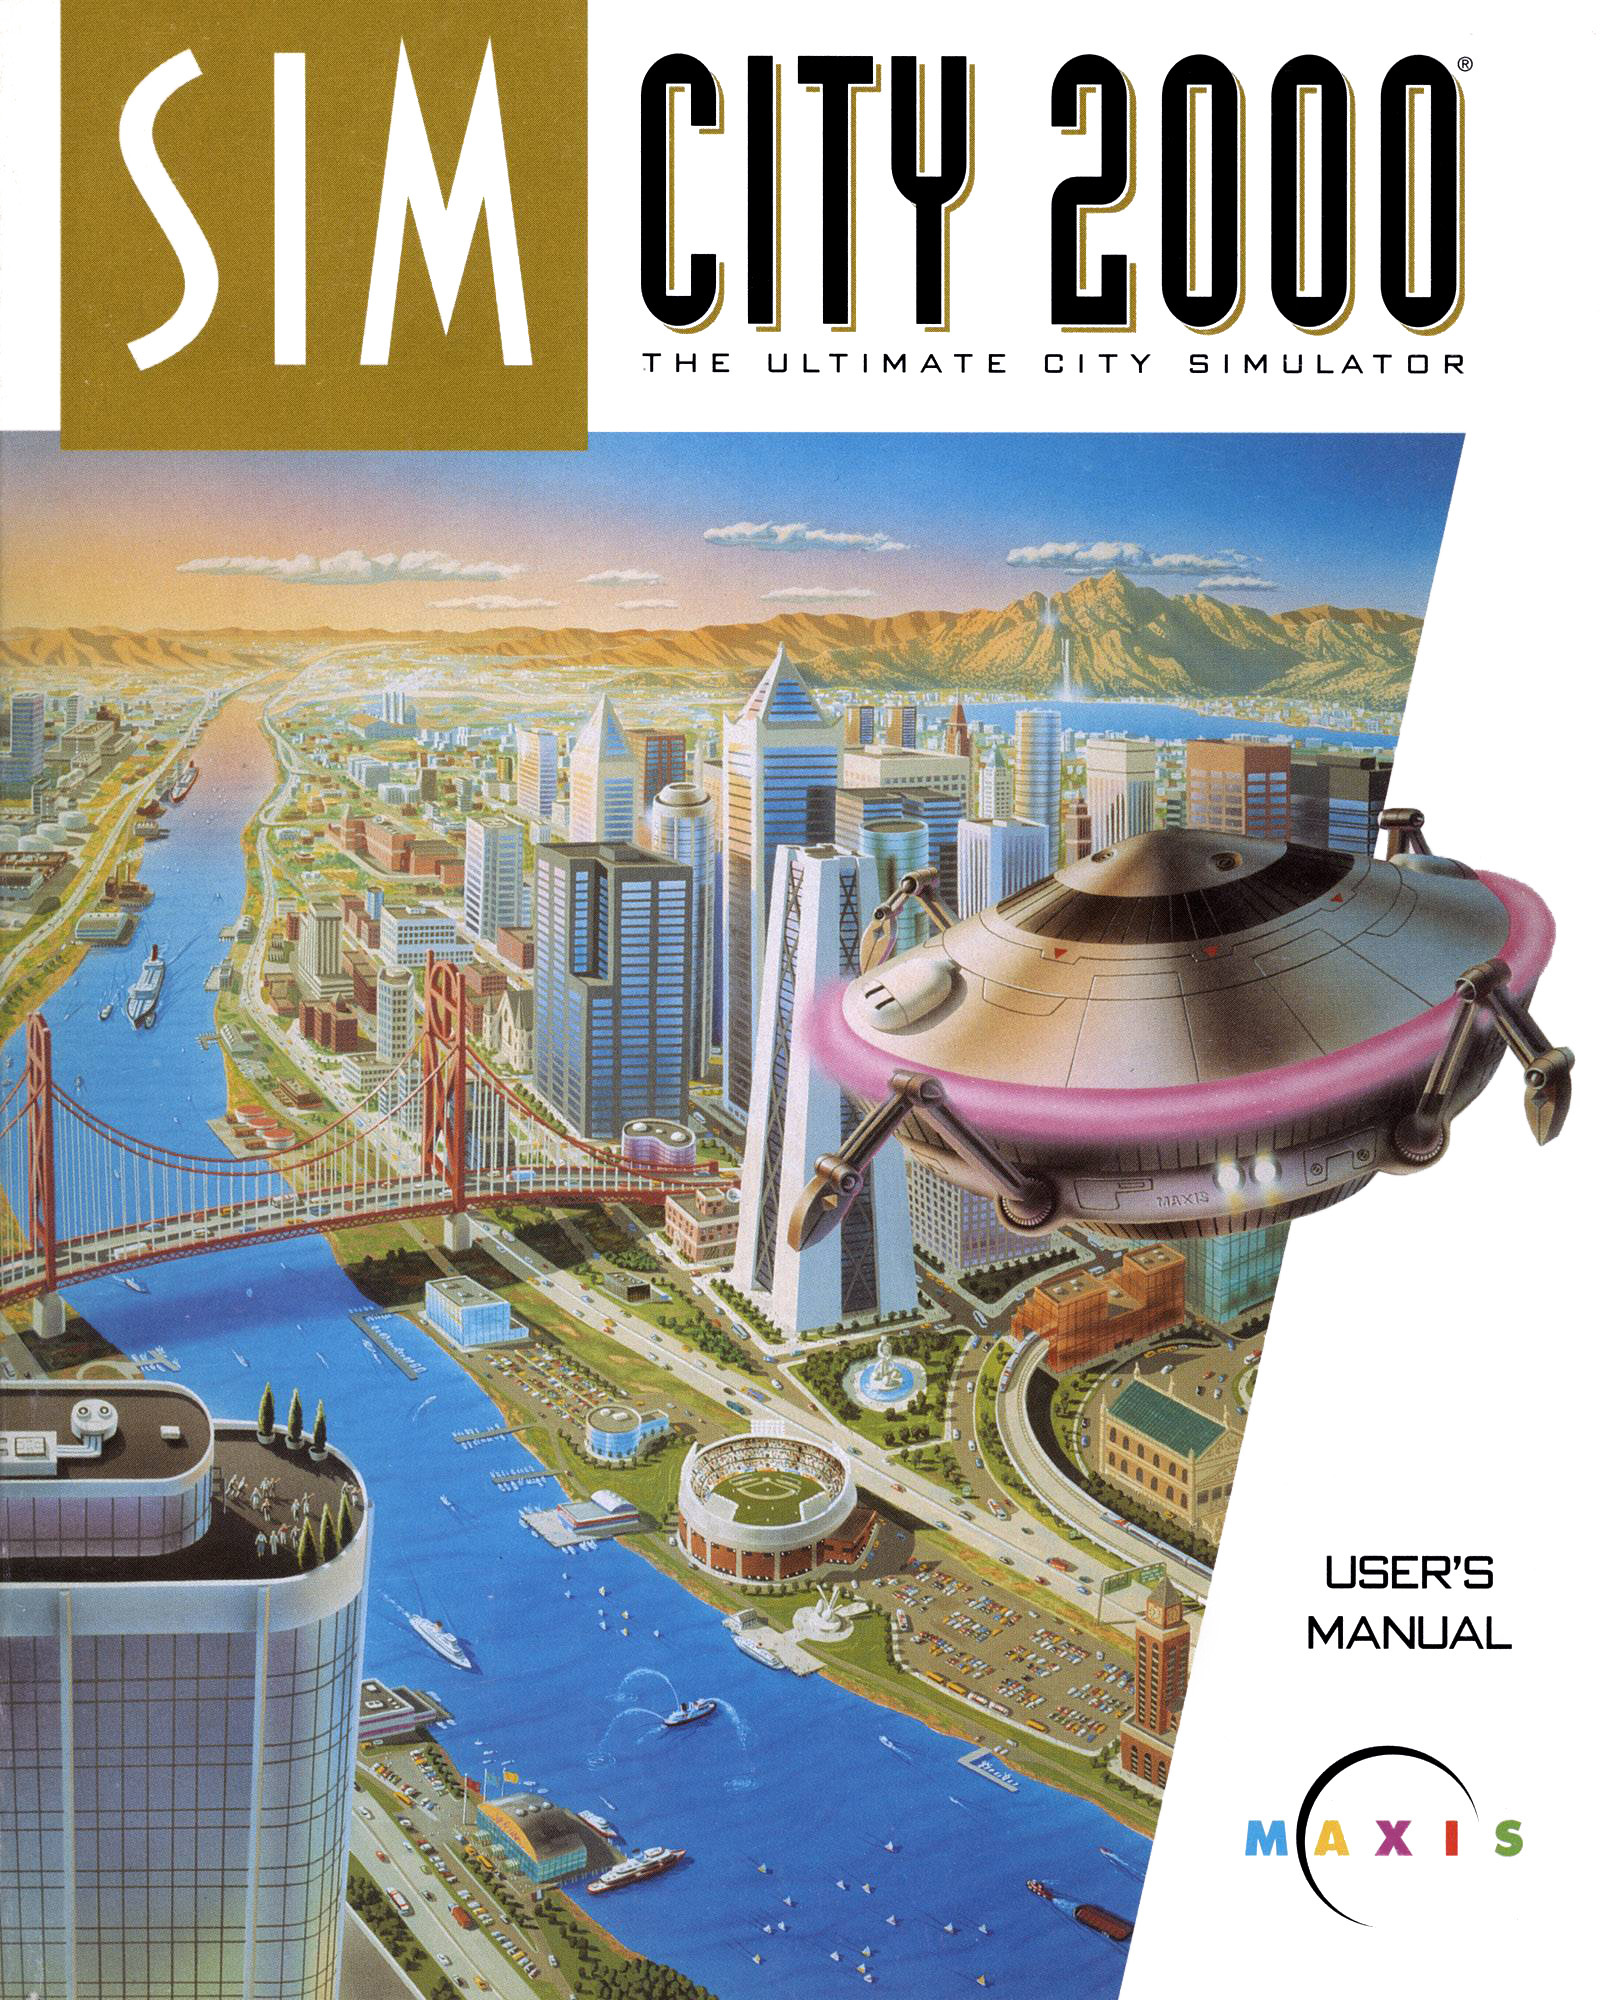 download simcity 2000 full version free